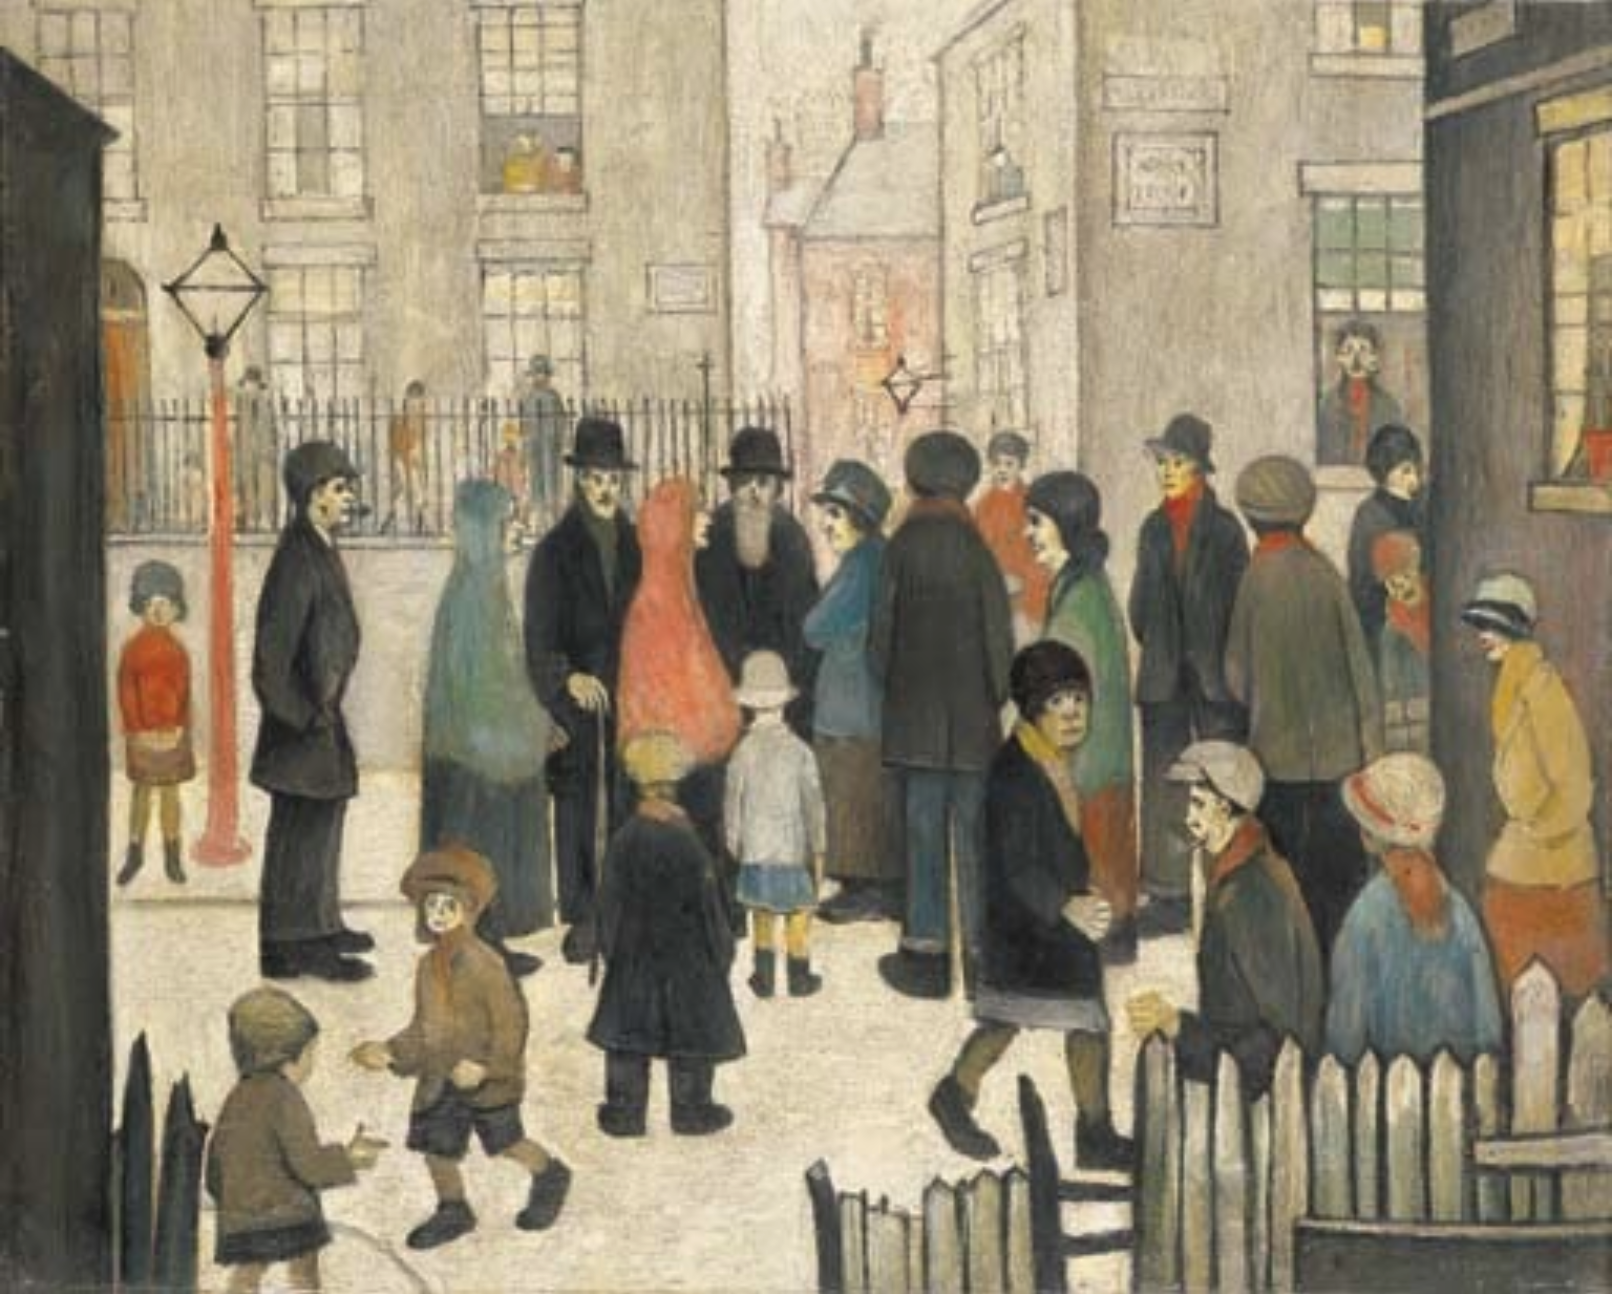 People Talking (1930) by Laurence Stephen Lowry (1887 - 1976), English artist.